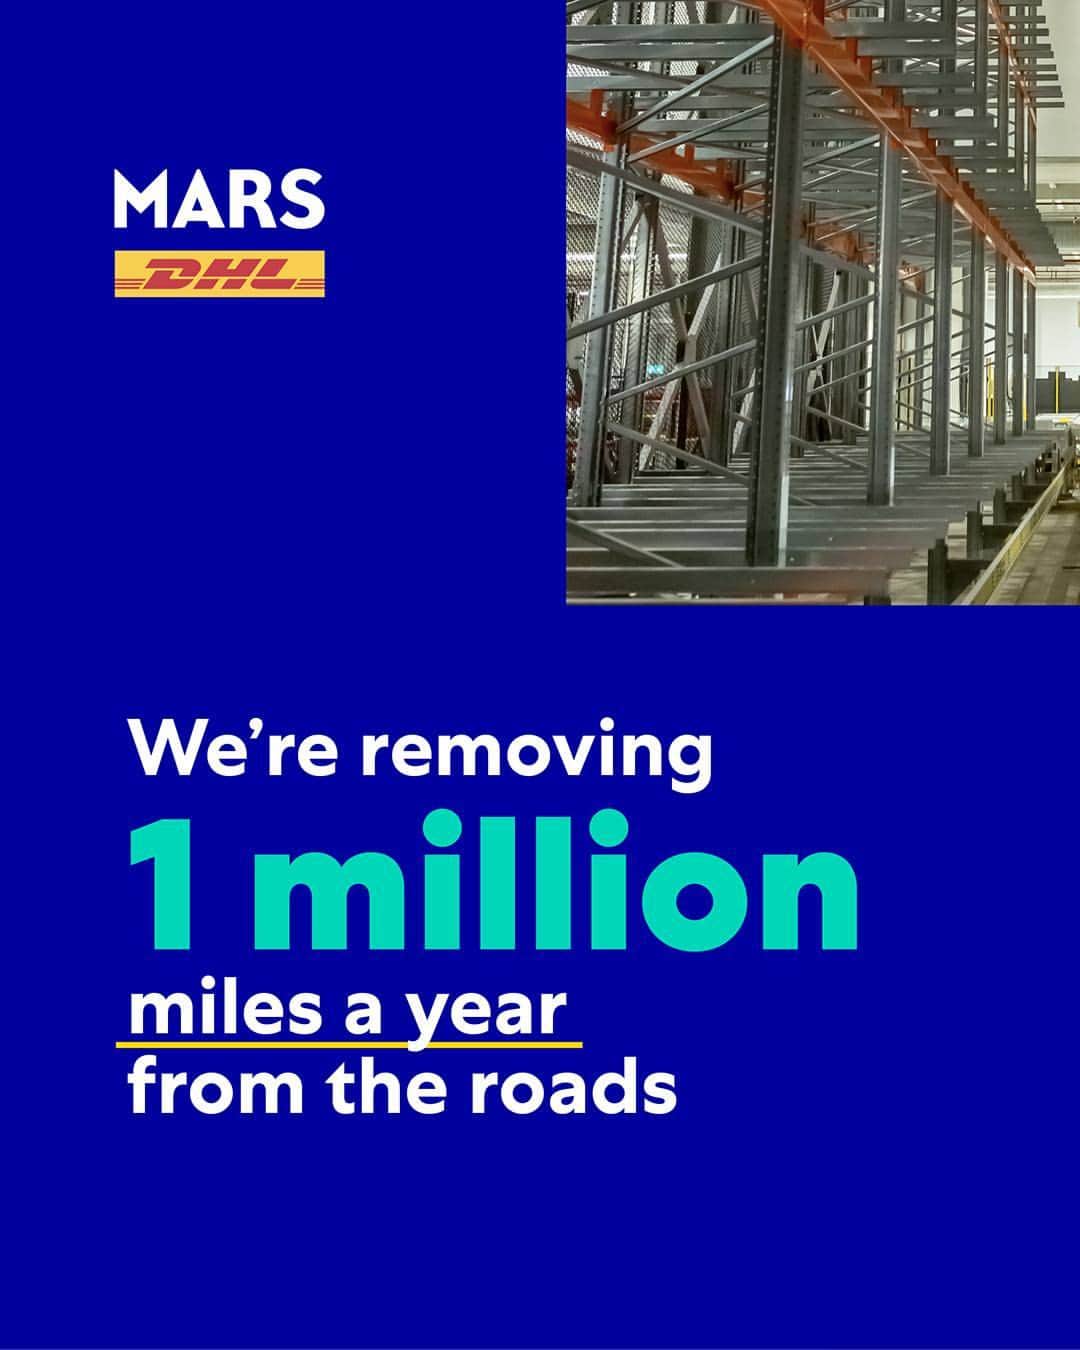 Marsのインスタグラム：「We’re proud to share another milestone along our journey to making a healthier planet tomorrow. We’ve partnered with DHL in the UK to open two, state-of-the-art warehousing facilities, reducing our Mars UK logistics carbon footprint by 7.7%.  �Find out more about our meaningful step in creating a logistics operation that is sustainable, smart and agile at the link in our bio.  �#TomorrowStartsToday #DHL」